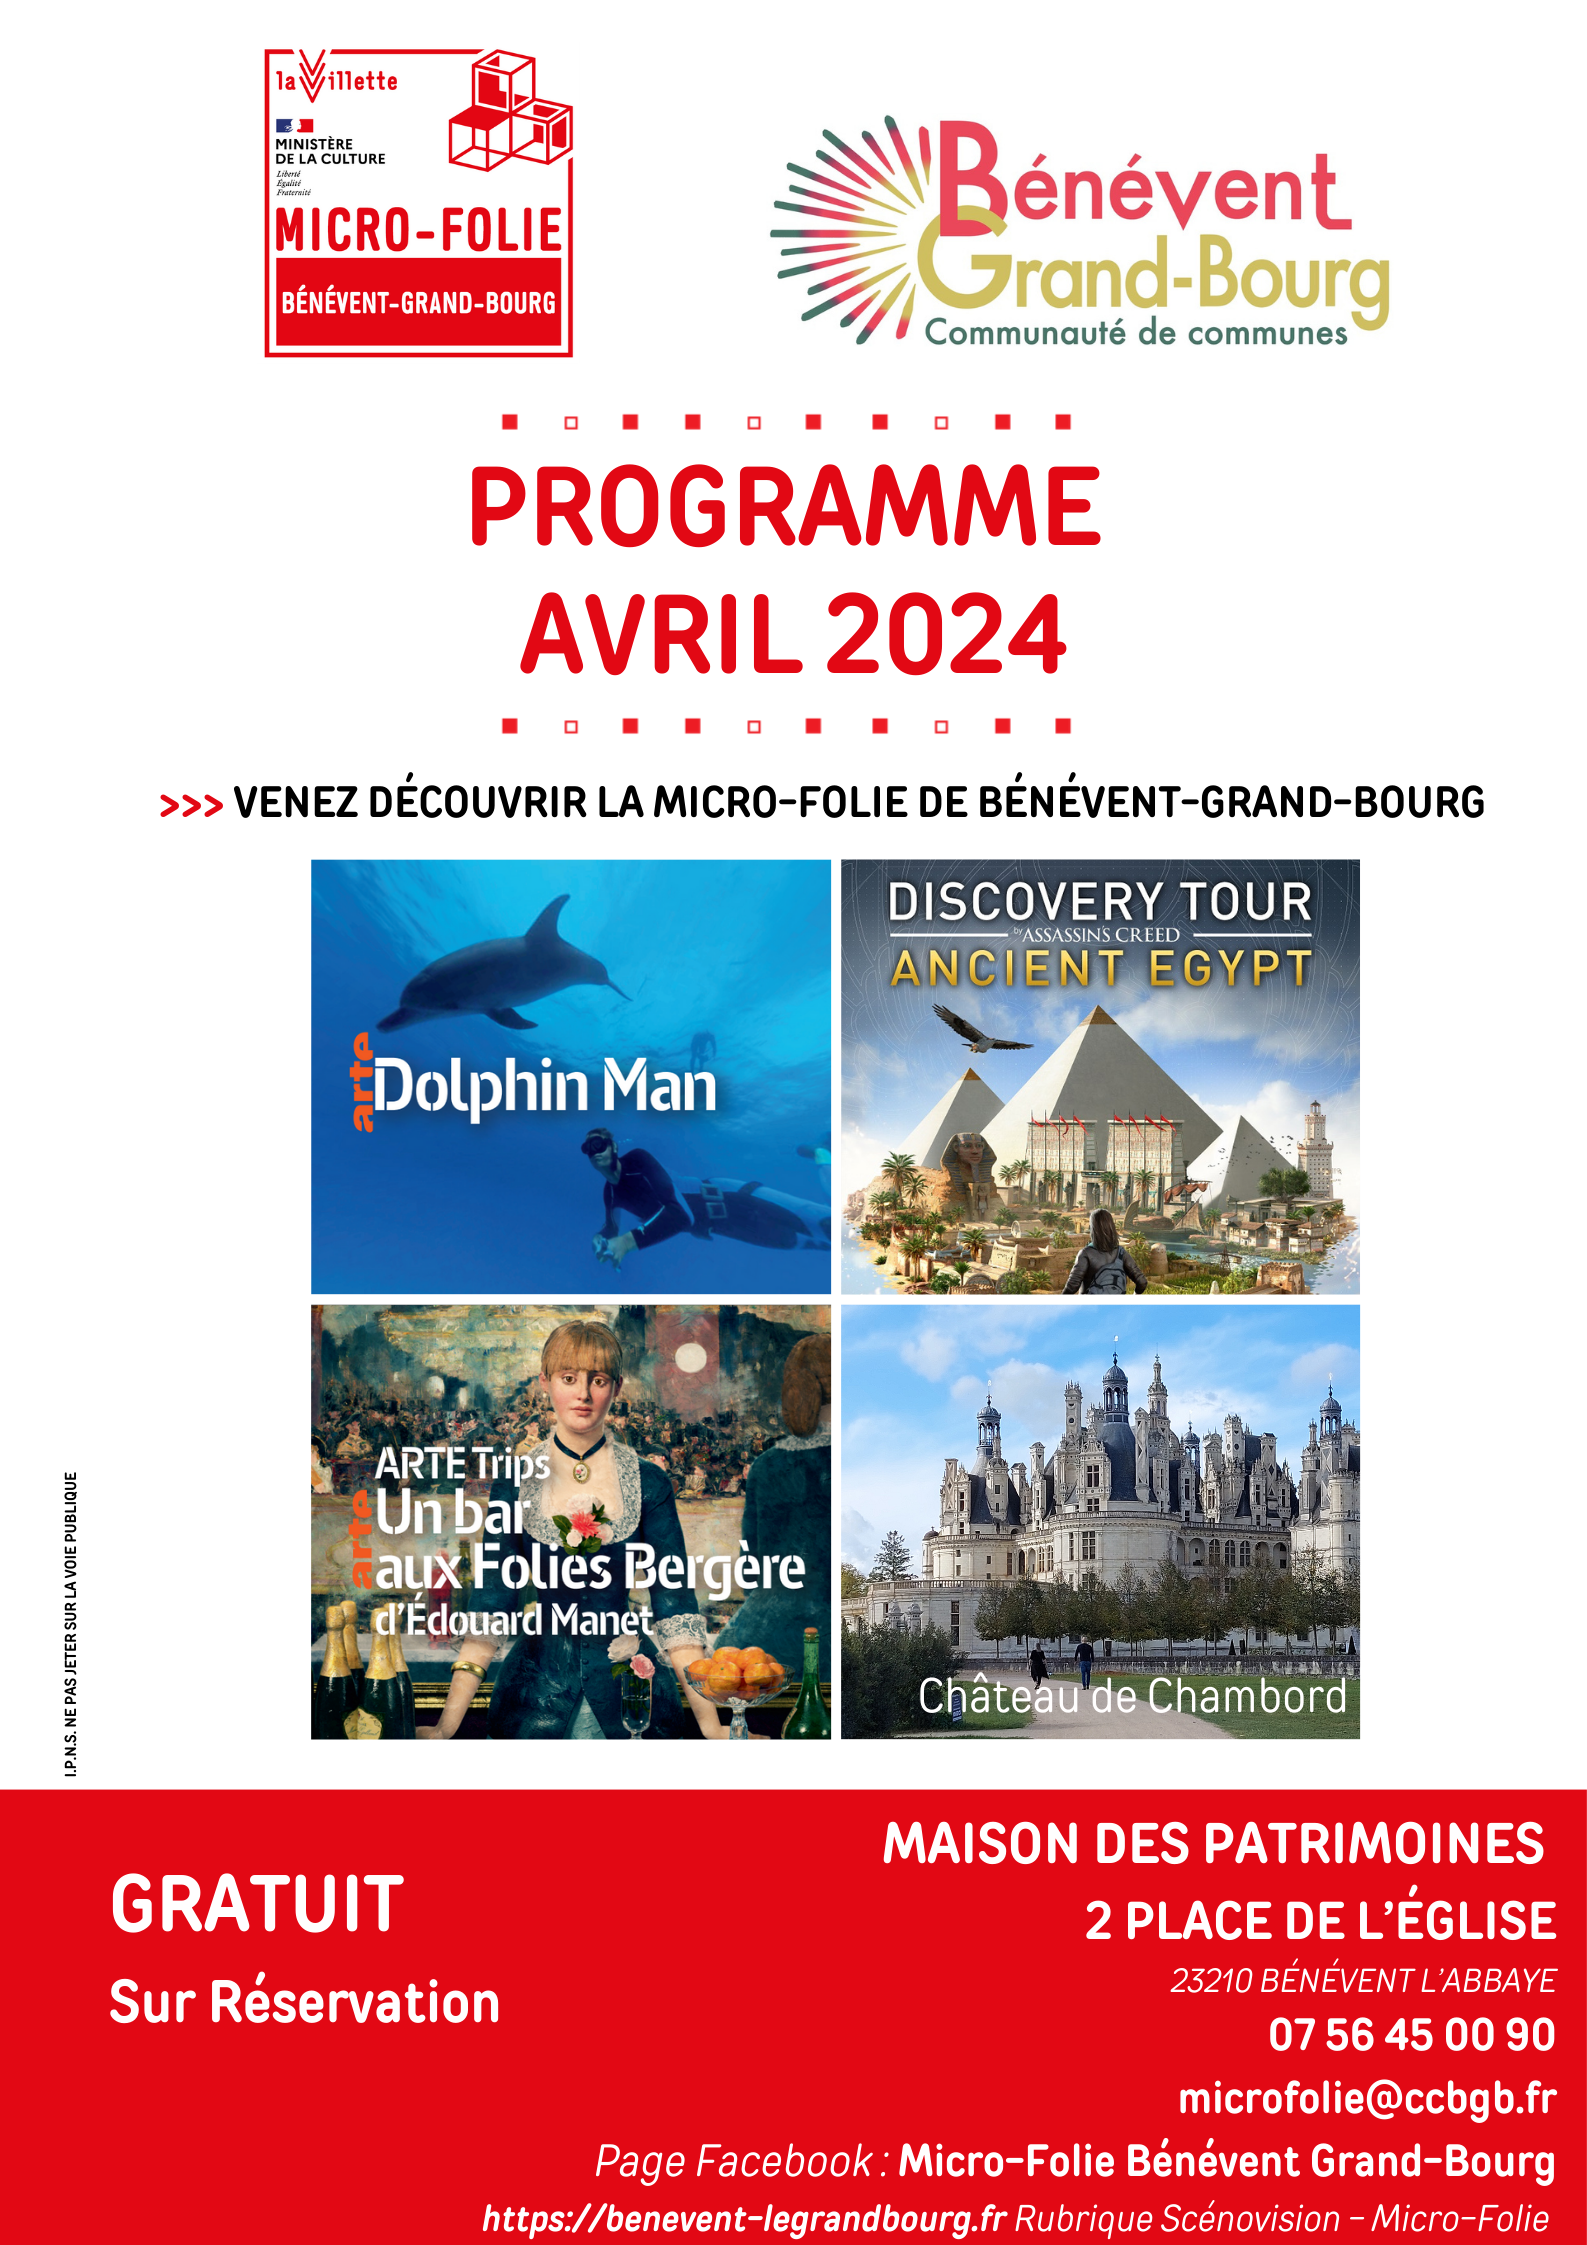 Progrramme avril 2024  _1_.png